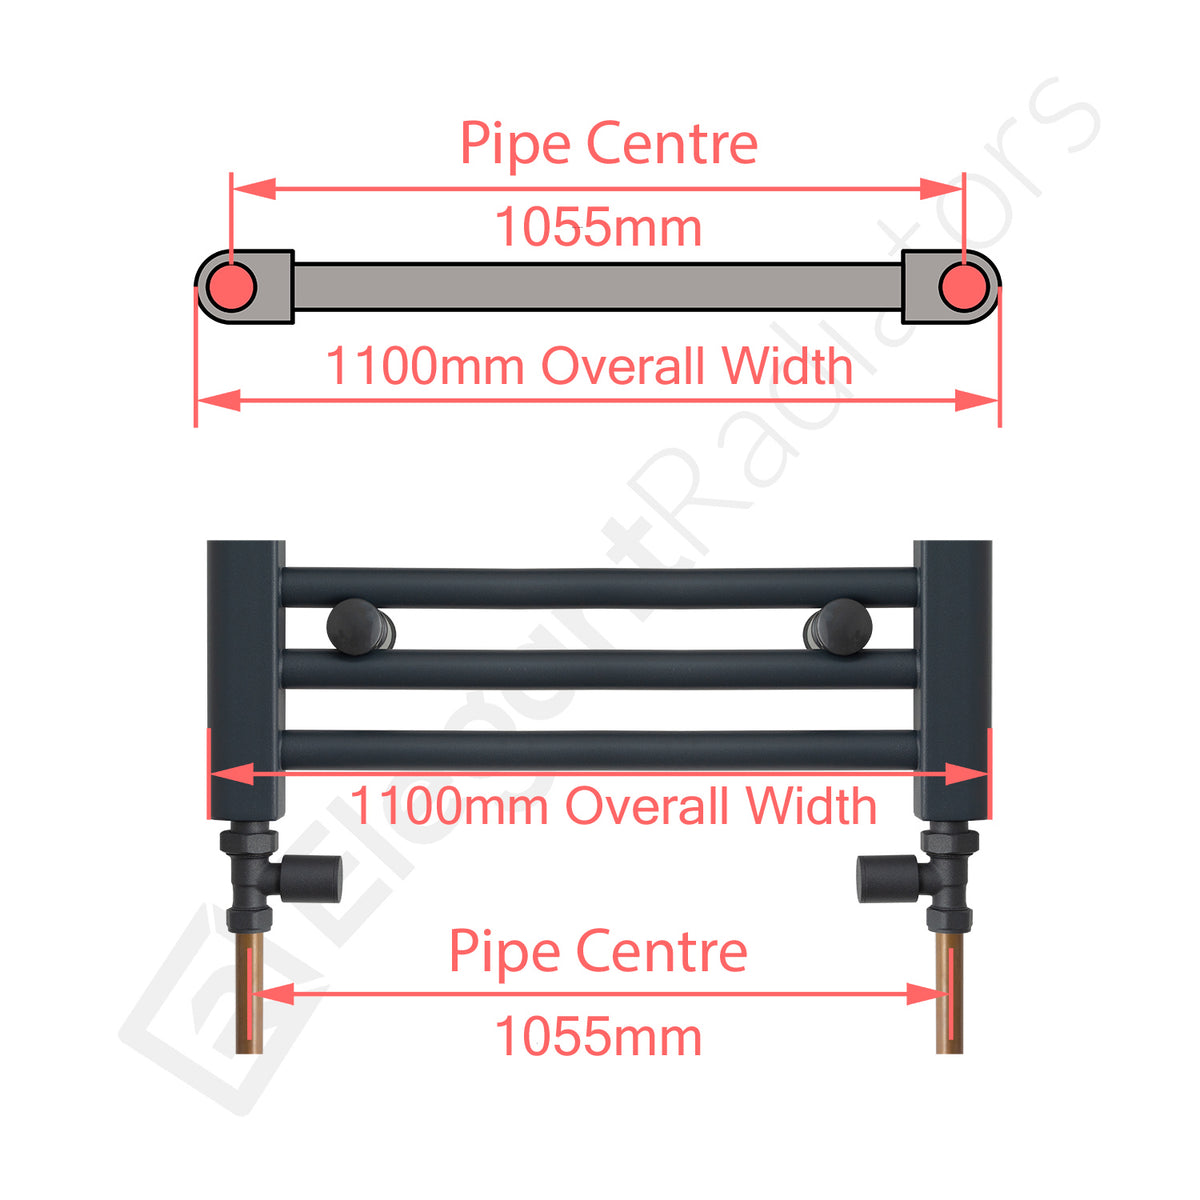 1100mm Wide Towel Rail Pipe Centre / Axis 1055mm diagram